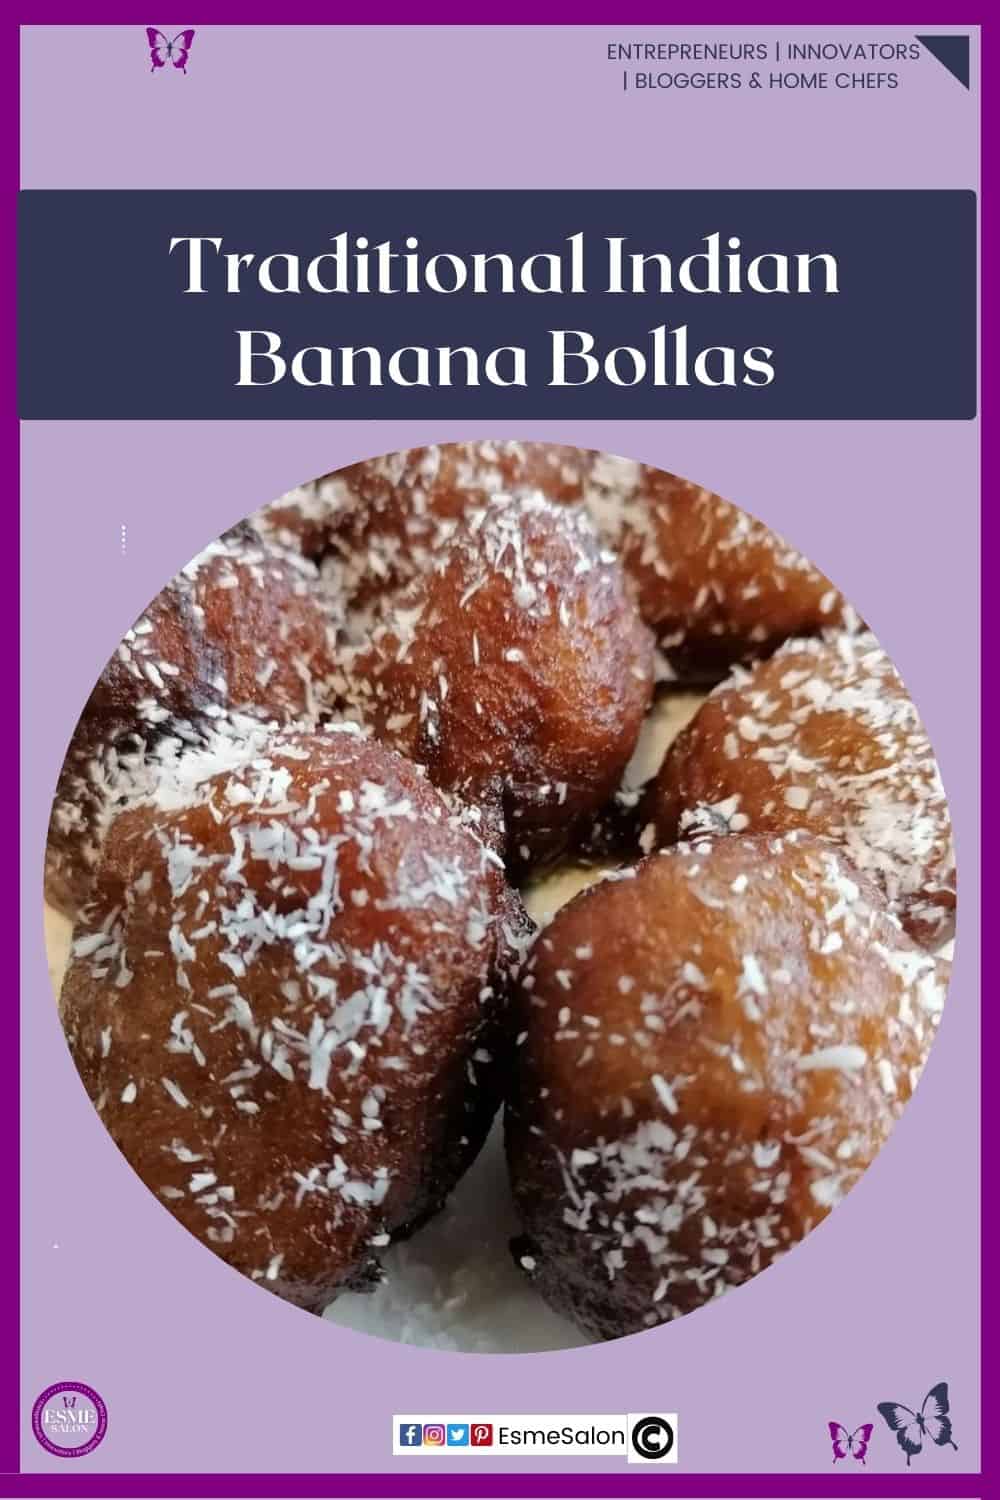 an image of a round banana fried fritter / bolla and dipped syrup and then covered in coconut